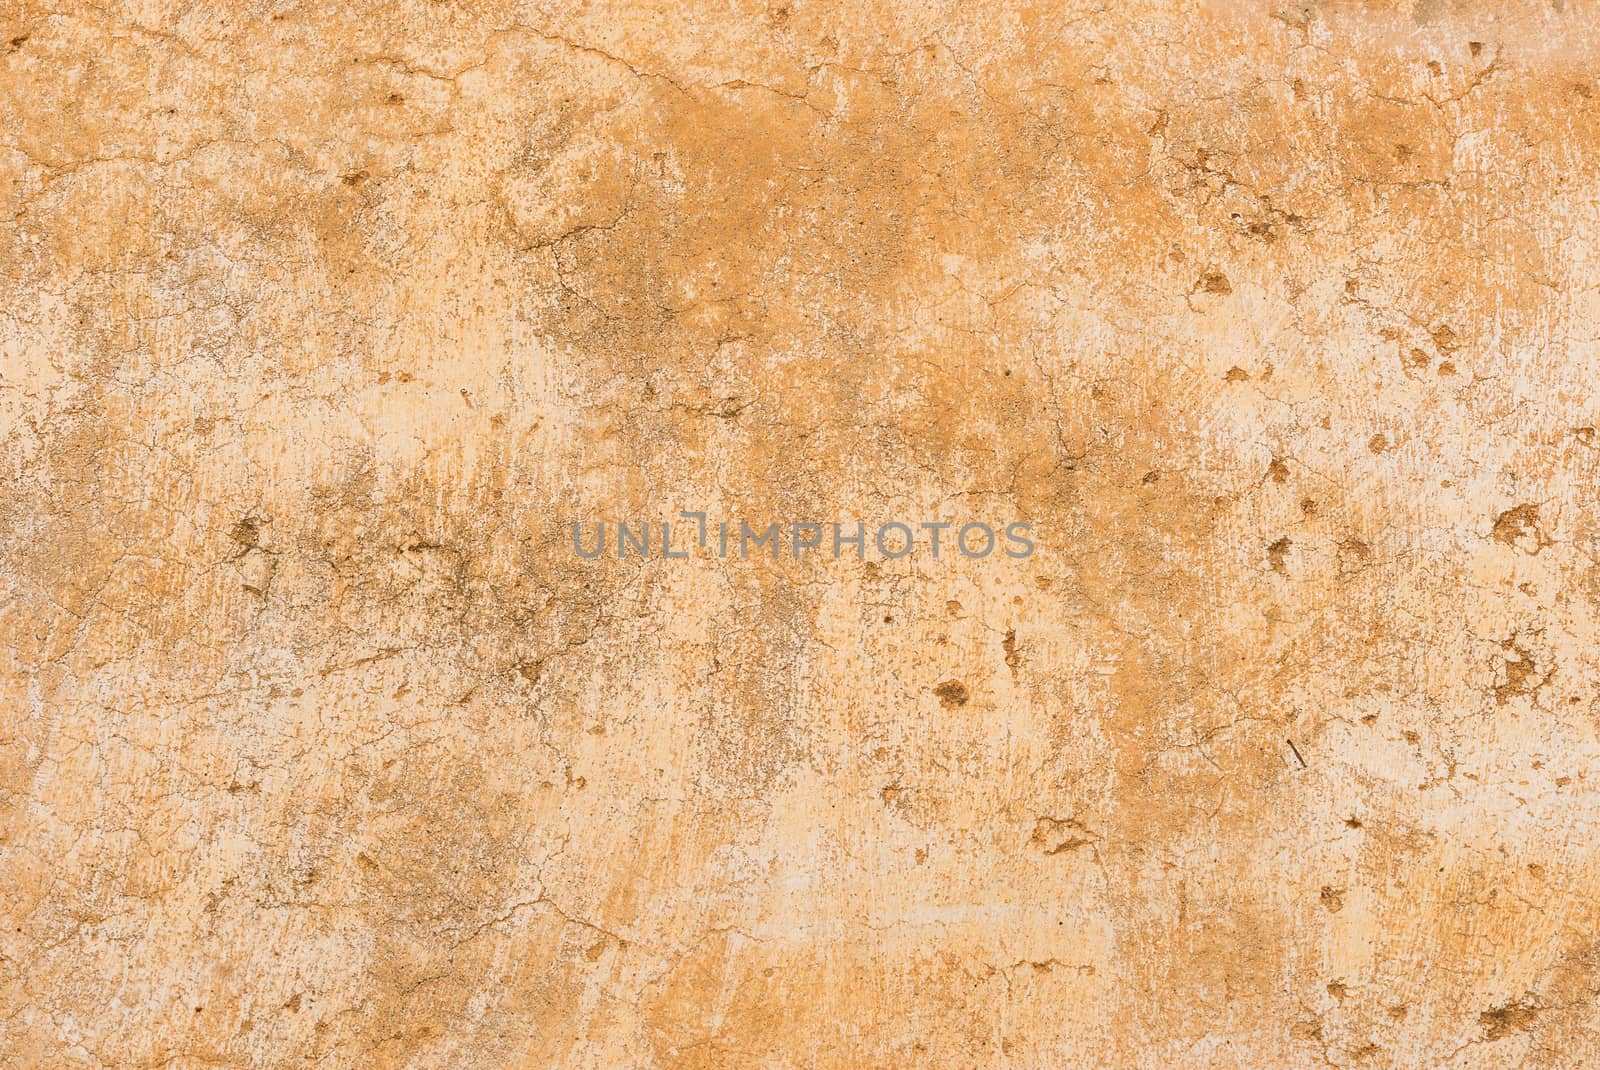 Vintage colored wall background with rustic weathered plaster texture